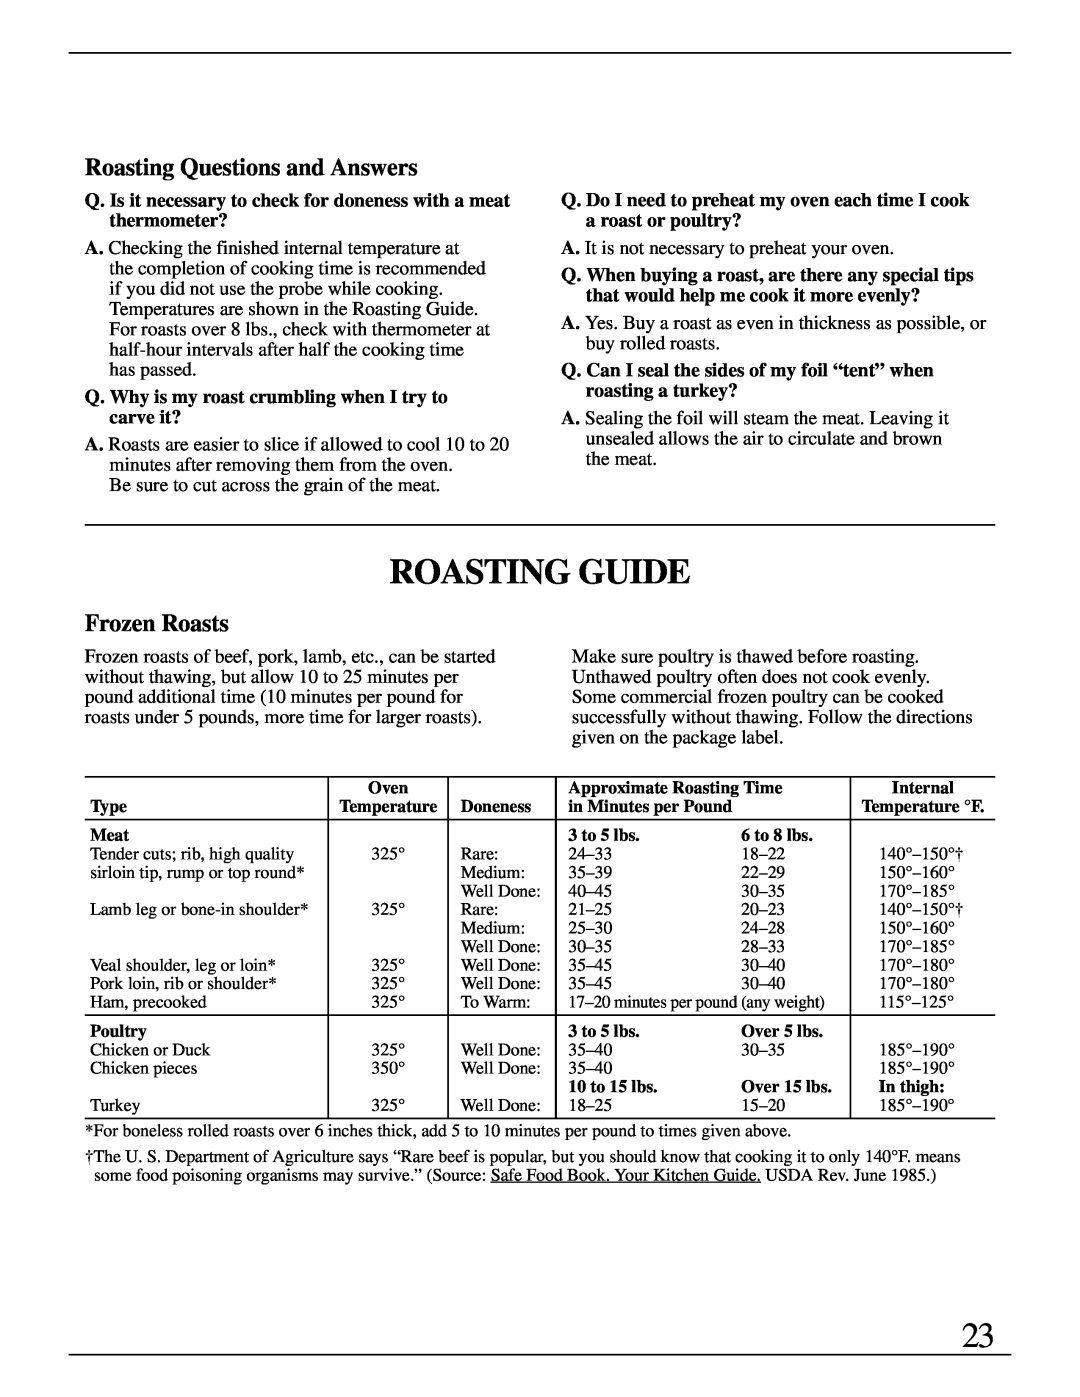 GE Monogram ZEK735 manual Roasting Guide, Roasting Questions and Answers, Frozen Roasts 